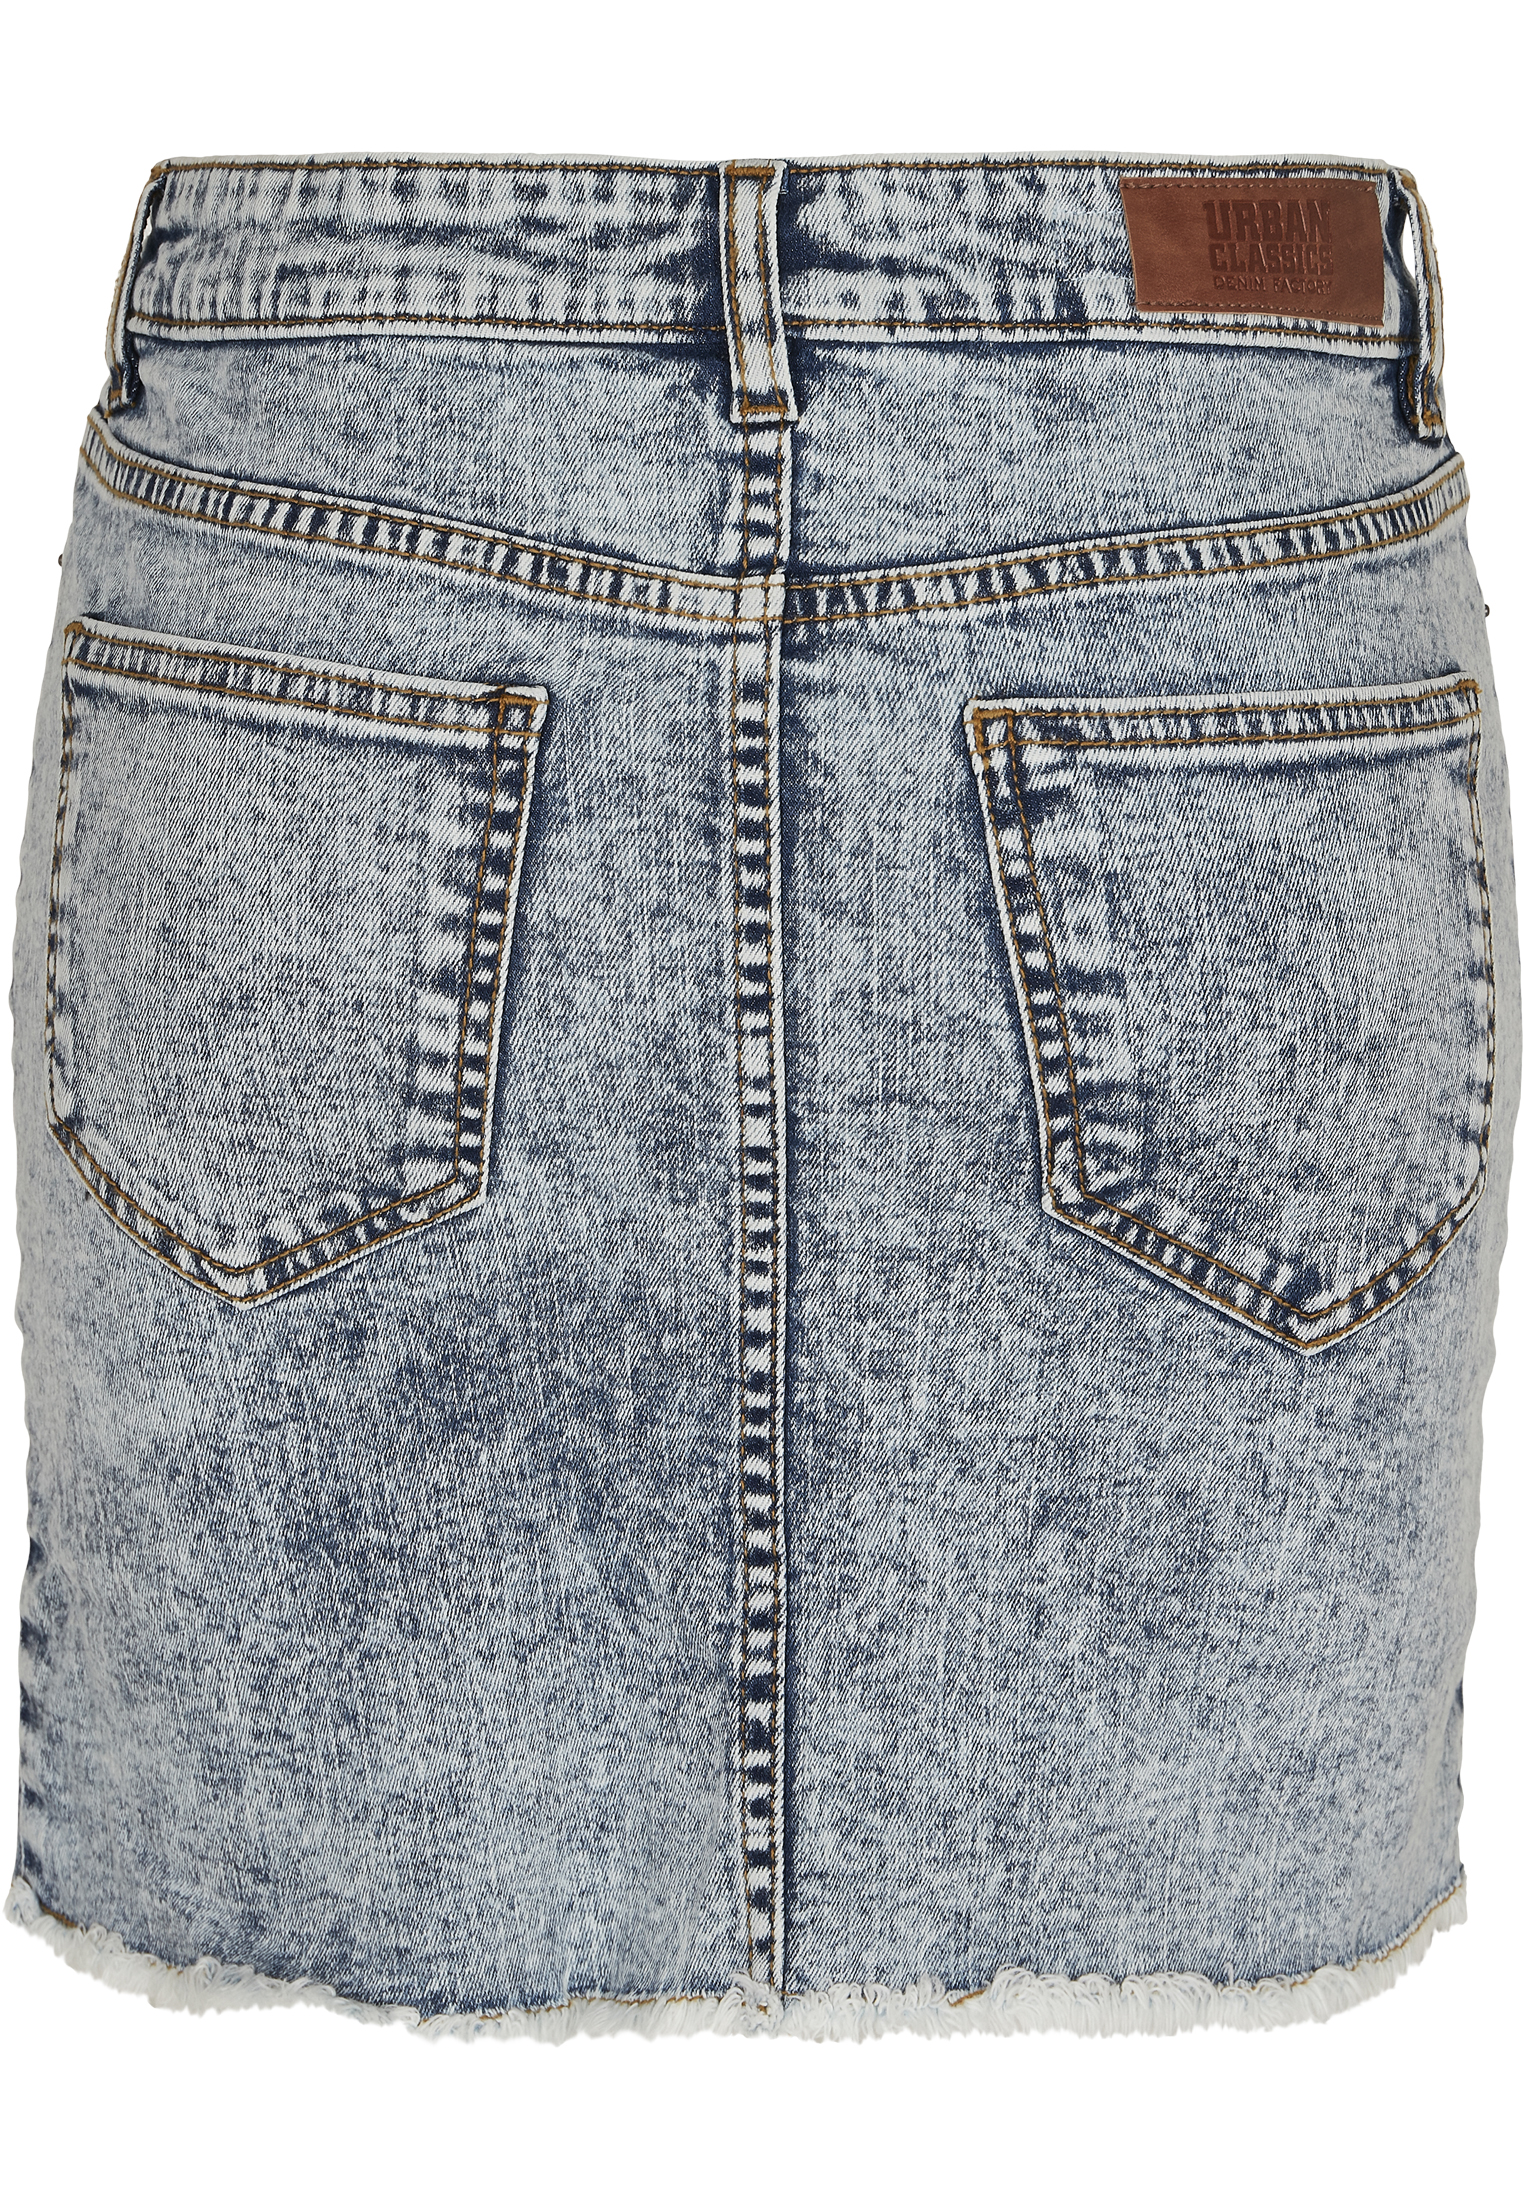 Curvy Ladies Denim Skirt in Farbe light skyblue acid washed